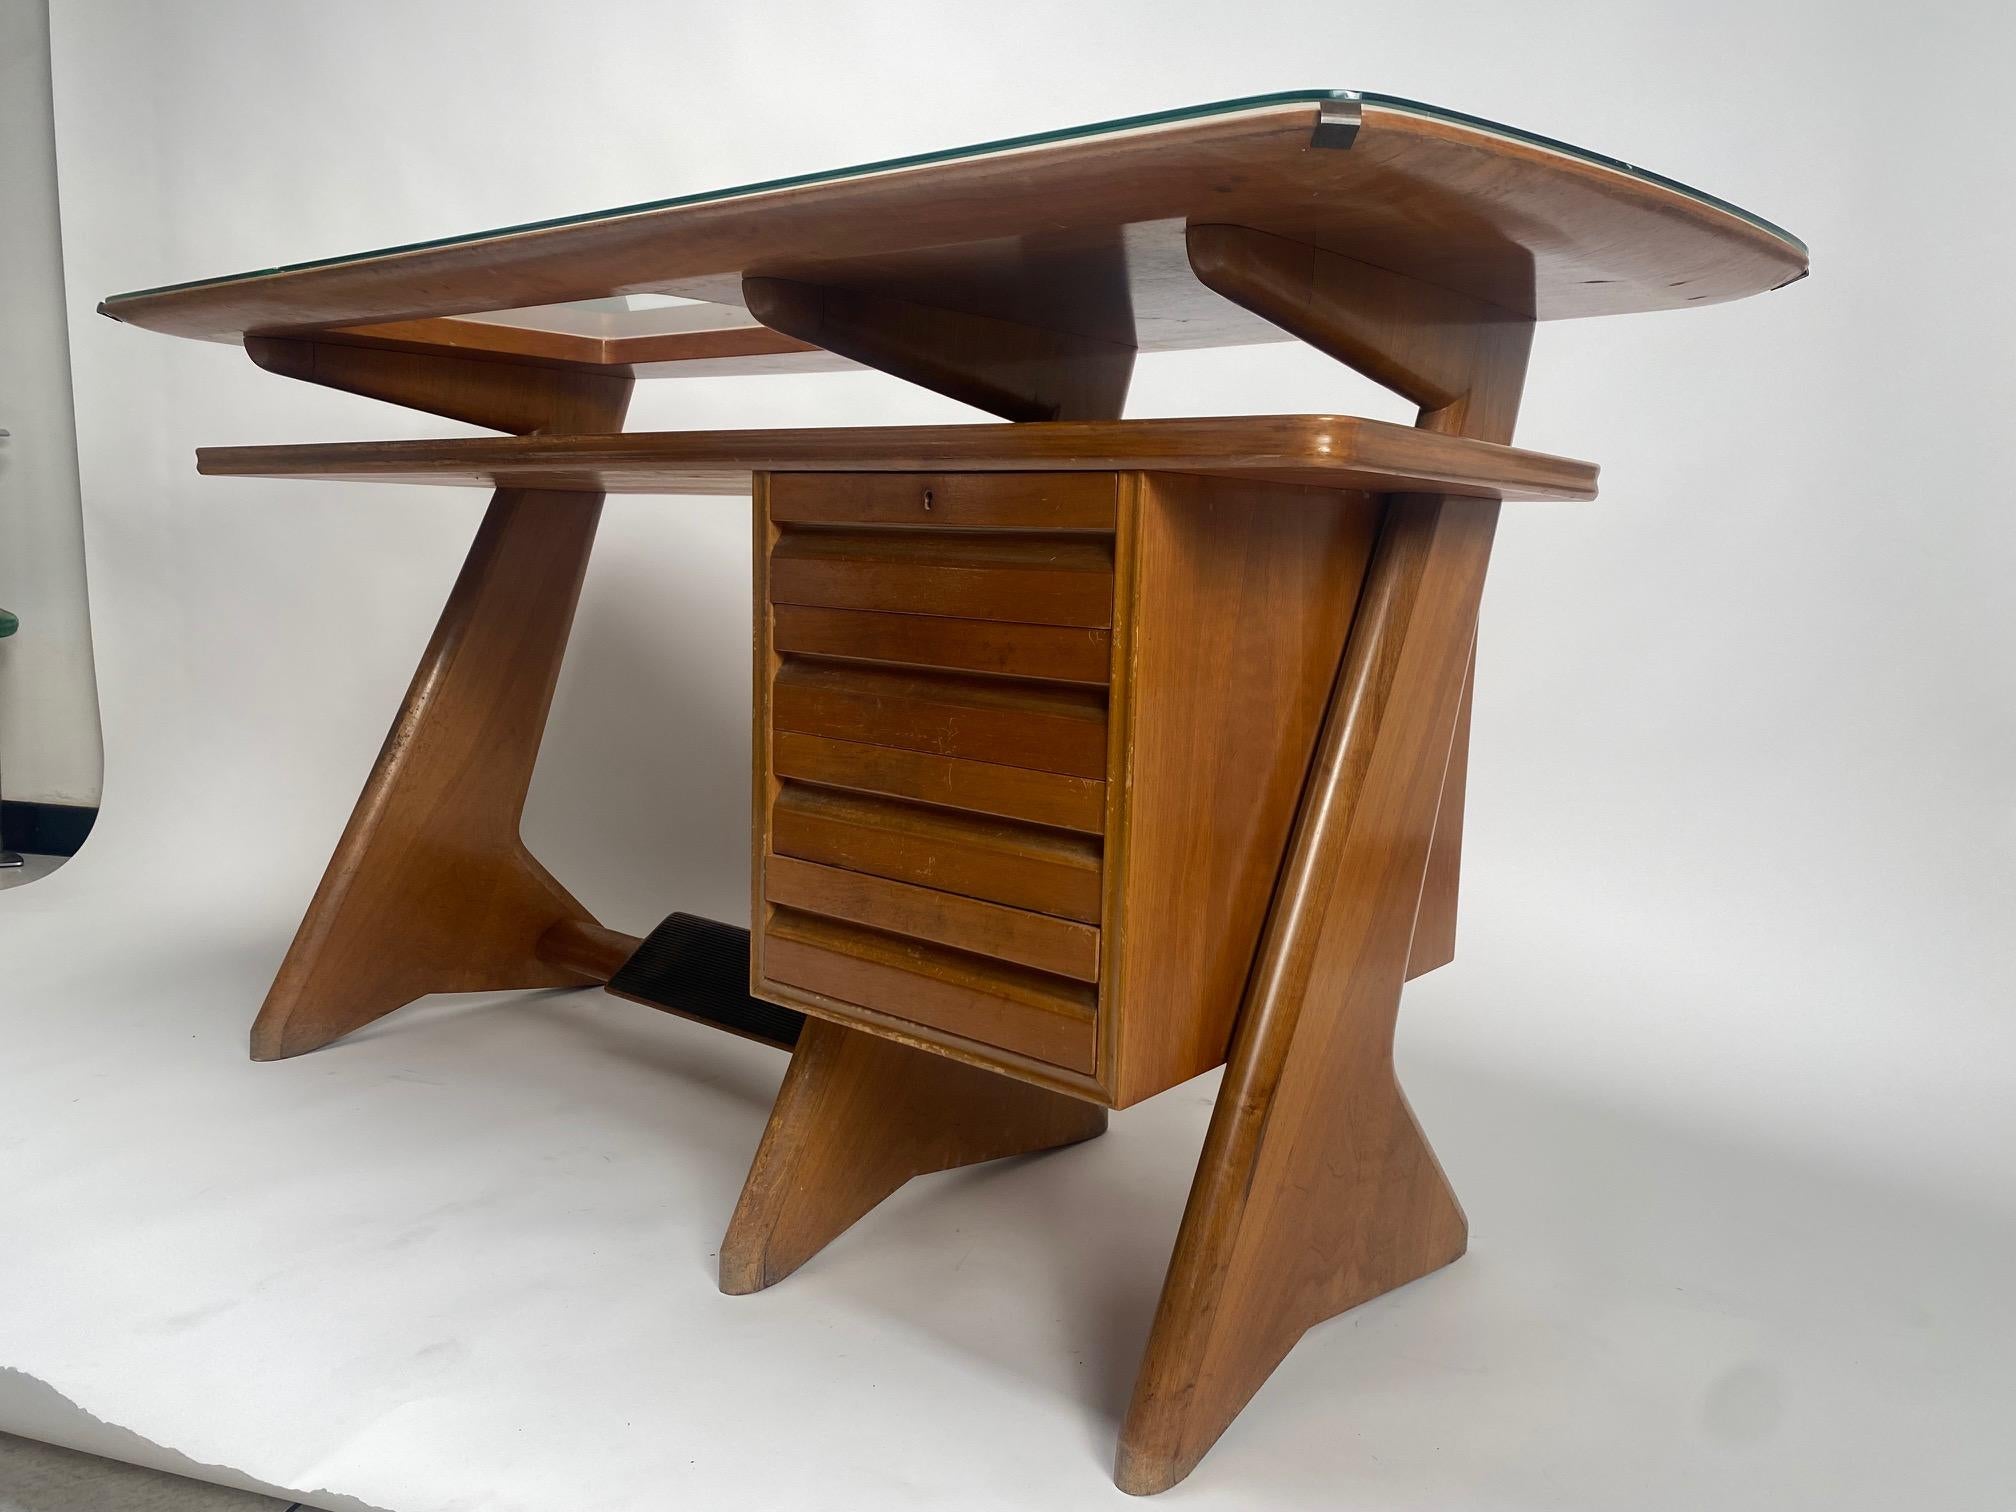 Mid-20th Century Important Desk in wood and glass by Melchiorre Bega (Attr.), Italy, 1950s For Sale